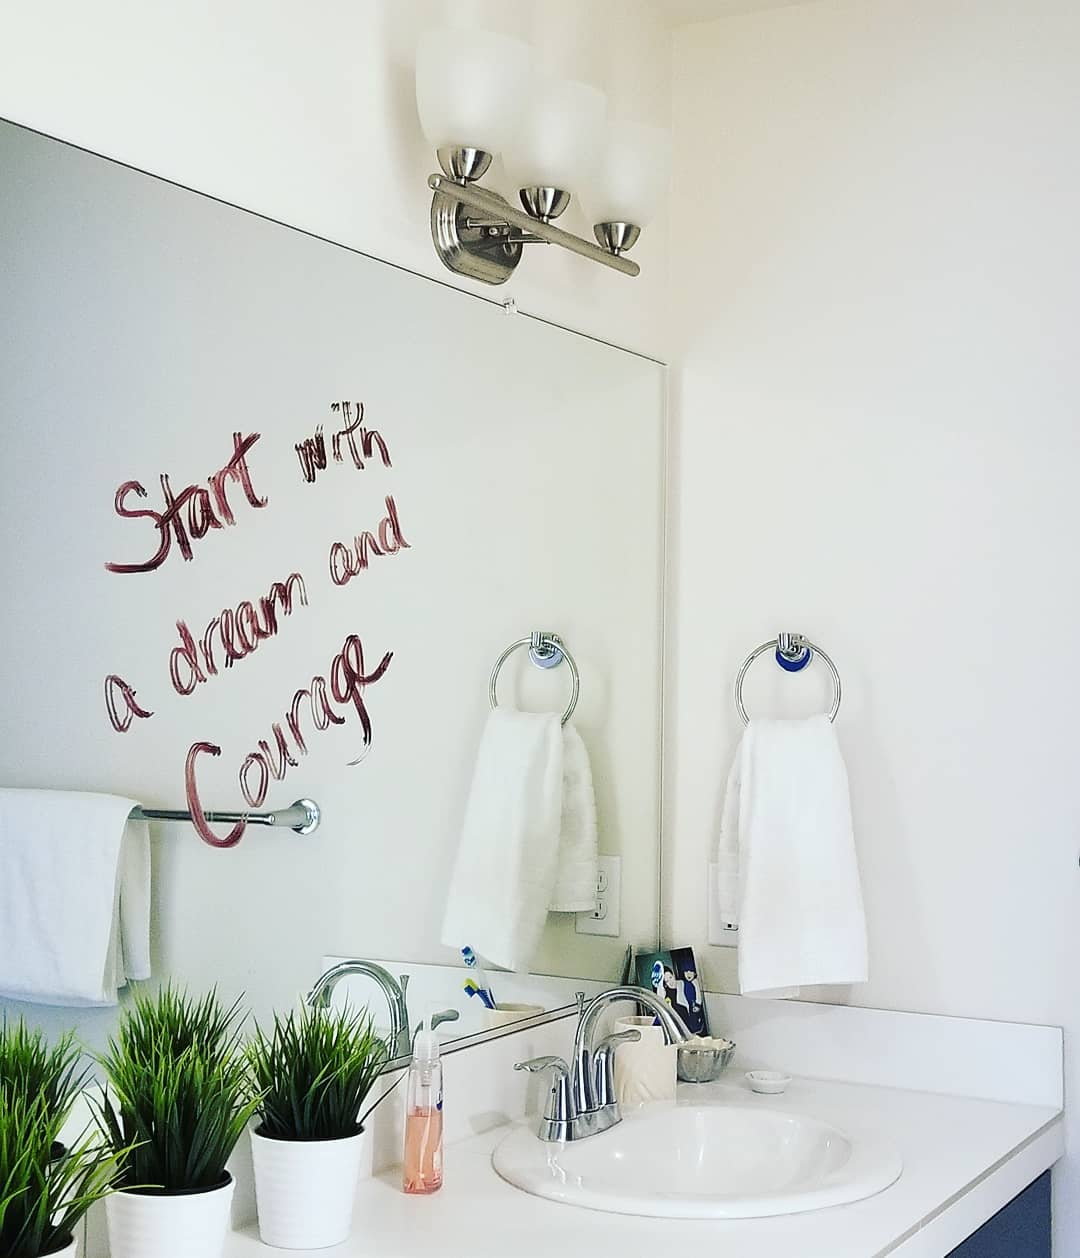 Mirror in bathroom with message saying start with a dream and courage. Photo by Instagram user @essgeez